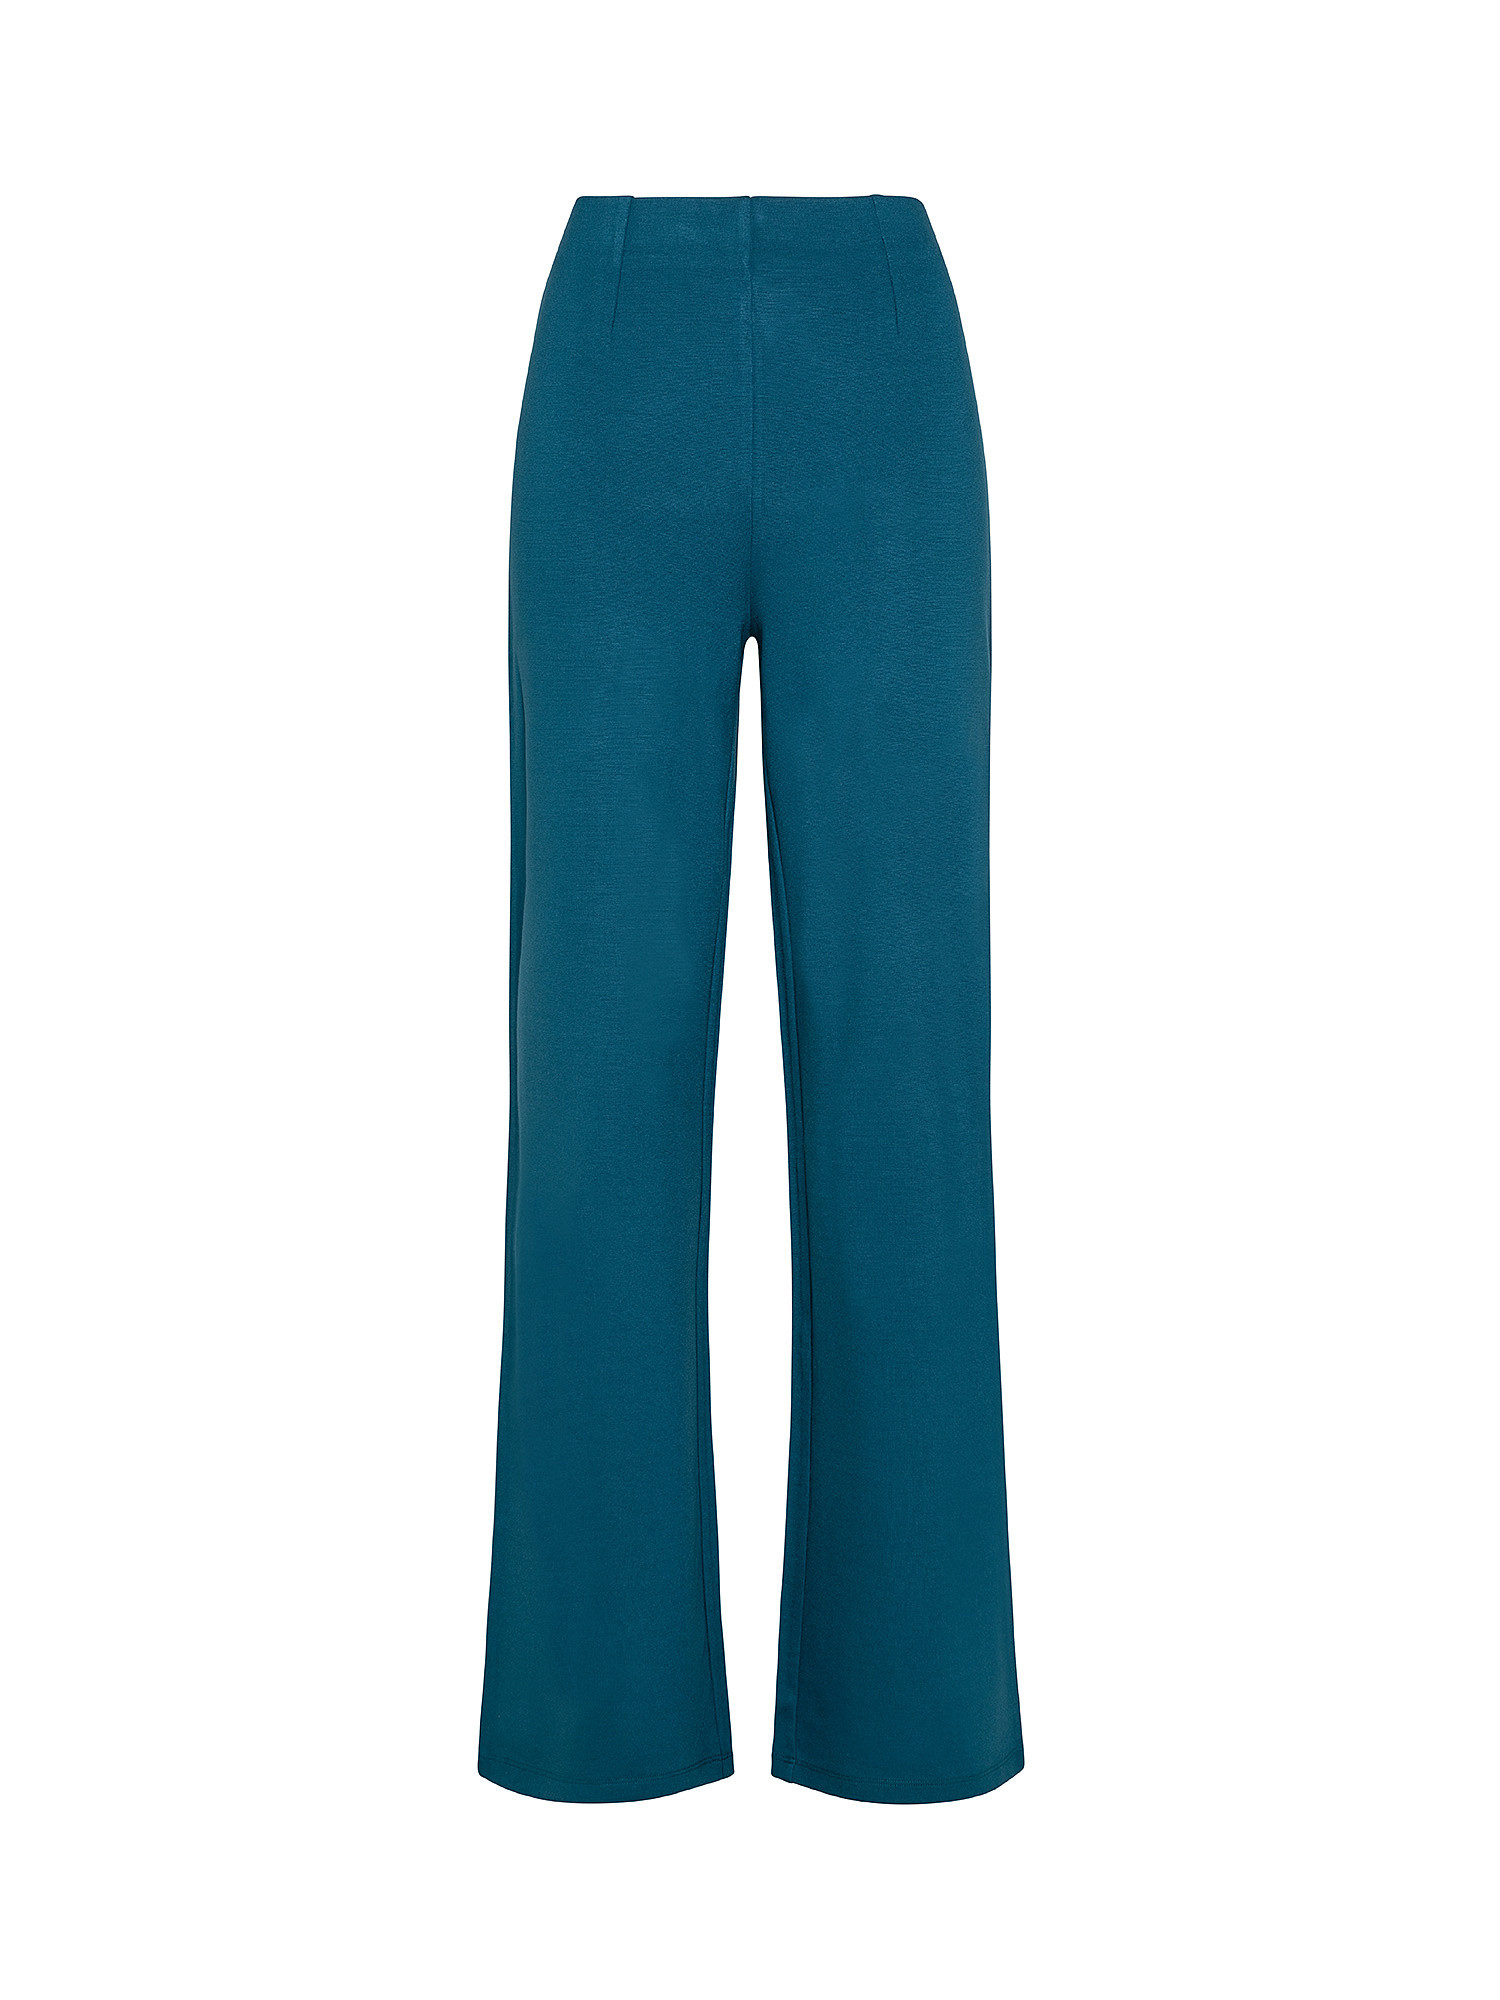 Wide leg trousers, Green teal, large image number 0